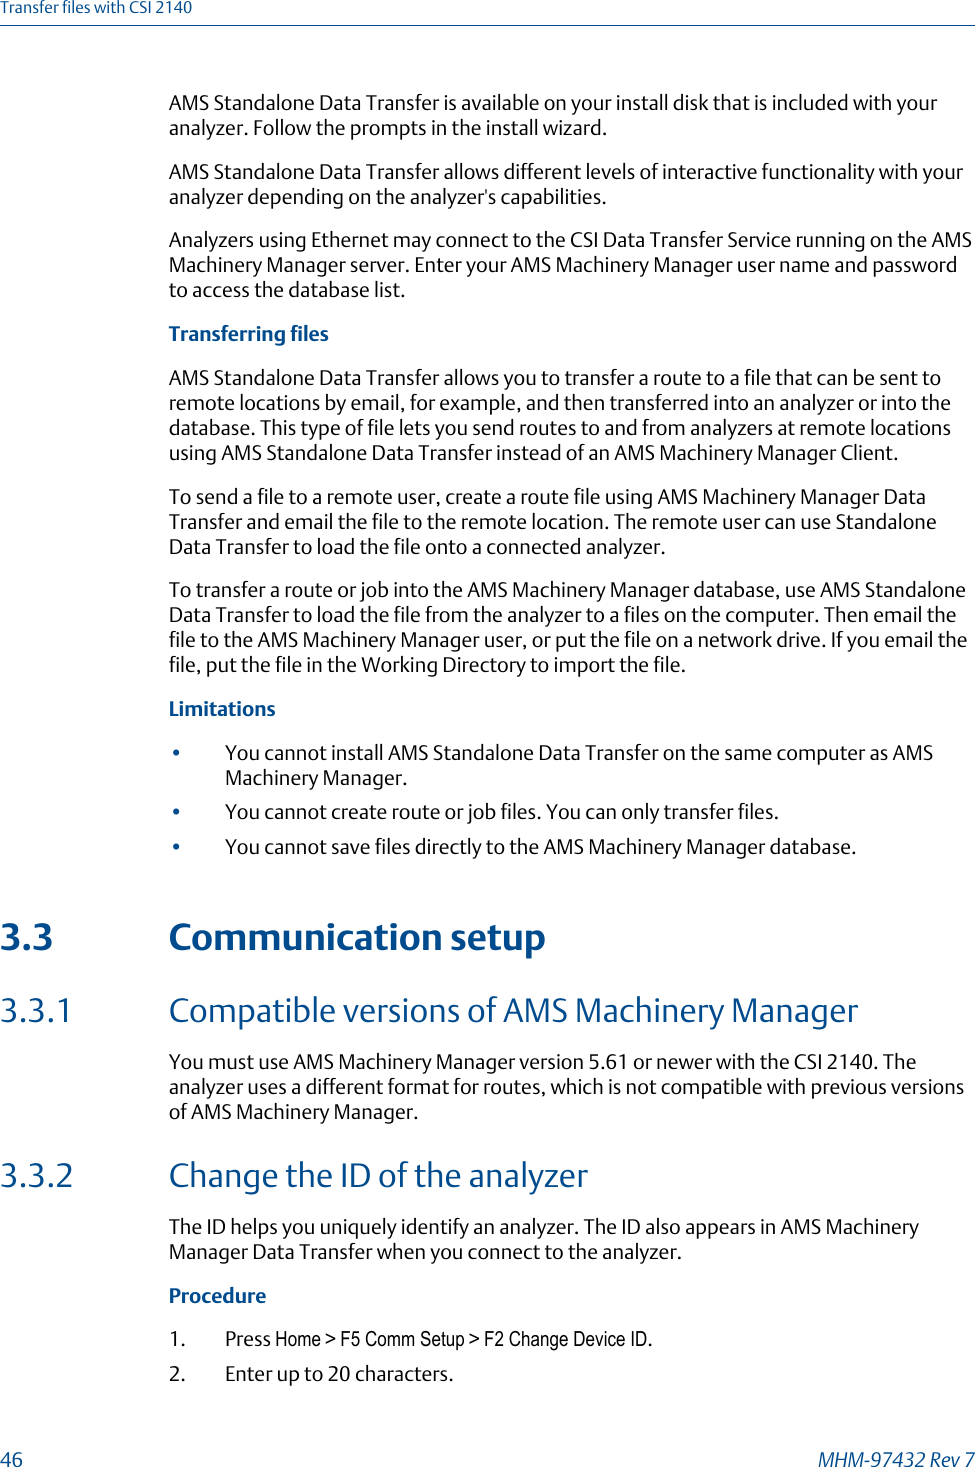 AMS Standalone Data Transfer is available on your install disk that is included with youranalyzer. Follow the prompts in the install wizard.AMS Standalone Data Transfer allows different levels of interactive functionality with youranalyzer depending on the analyzer&apos;s capabilities.Analyzers using Ethernet may connect to the CSI Data Transfer Service running on the AMSMachinery Manager server. Enter your AMS Machinery Manager user name and passwordto access the database list.Transferring filesAMS Standalone Data Transfer allows you to transfer a route to a file that can be sent toremote locations by email, for example, and then transferred into an analyzer or into thedatabase. This type of file lets you send routes to and from analyzers at remote locationsusing AMS Standalone Data Transfer instead of an AMS Machinery Manager Client.To send a file to a remote user, create a route file using AMS Machinery Manager DataTransfer and email the file to the remote location. The remote user can use StandaloneData Transfer to load the file onto a connected analyzer.To transfer a route or job into the AMS Machinery Manager database, use AMS StandaloneData Transfer to load the file from the analyzer to a files on the computer. Then email thefile to the AMS Machinery Manager user, or put the file on a network drive. If you email thefile, put the file in the Working Directory to import the file.Limitations•You cannot install AMS Standalone Data Transfer on the same computer as AMSMachinery Manager.•You cannot create route or job files. You can only transfer files.•You cannot save files directly to the AMS Machinery Manager database.3.3 Communication setup3.3.1 Compatible versions of AMS Machinery ManagerYou must use AMS Machinery Manager version 5.61 or newer with the CSI 2140. Theanalyzer uses a different format for routes, which is not compatible with previous versionsof AMS Machinery Manager.3.3.2 Change the ID of the analyzerThe ID helps you uniquely identify an analyzer. The ID also appears in AMS MachineryManager Data Transfer when you connect to the analyzer.Procedure1. Press Home &gt; F5 Comm Setup &gt; F2 Change Device ID.2. Enter up to 20 characters.Transfer files with CSI 214046 MHM-97432 Rev 7